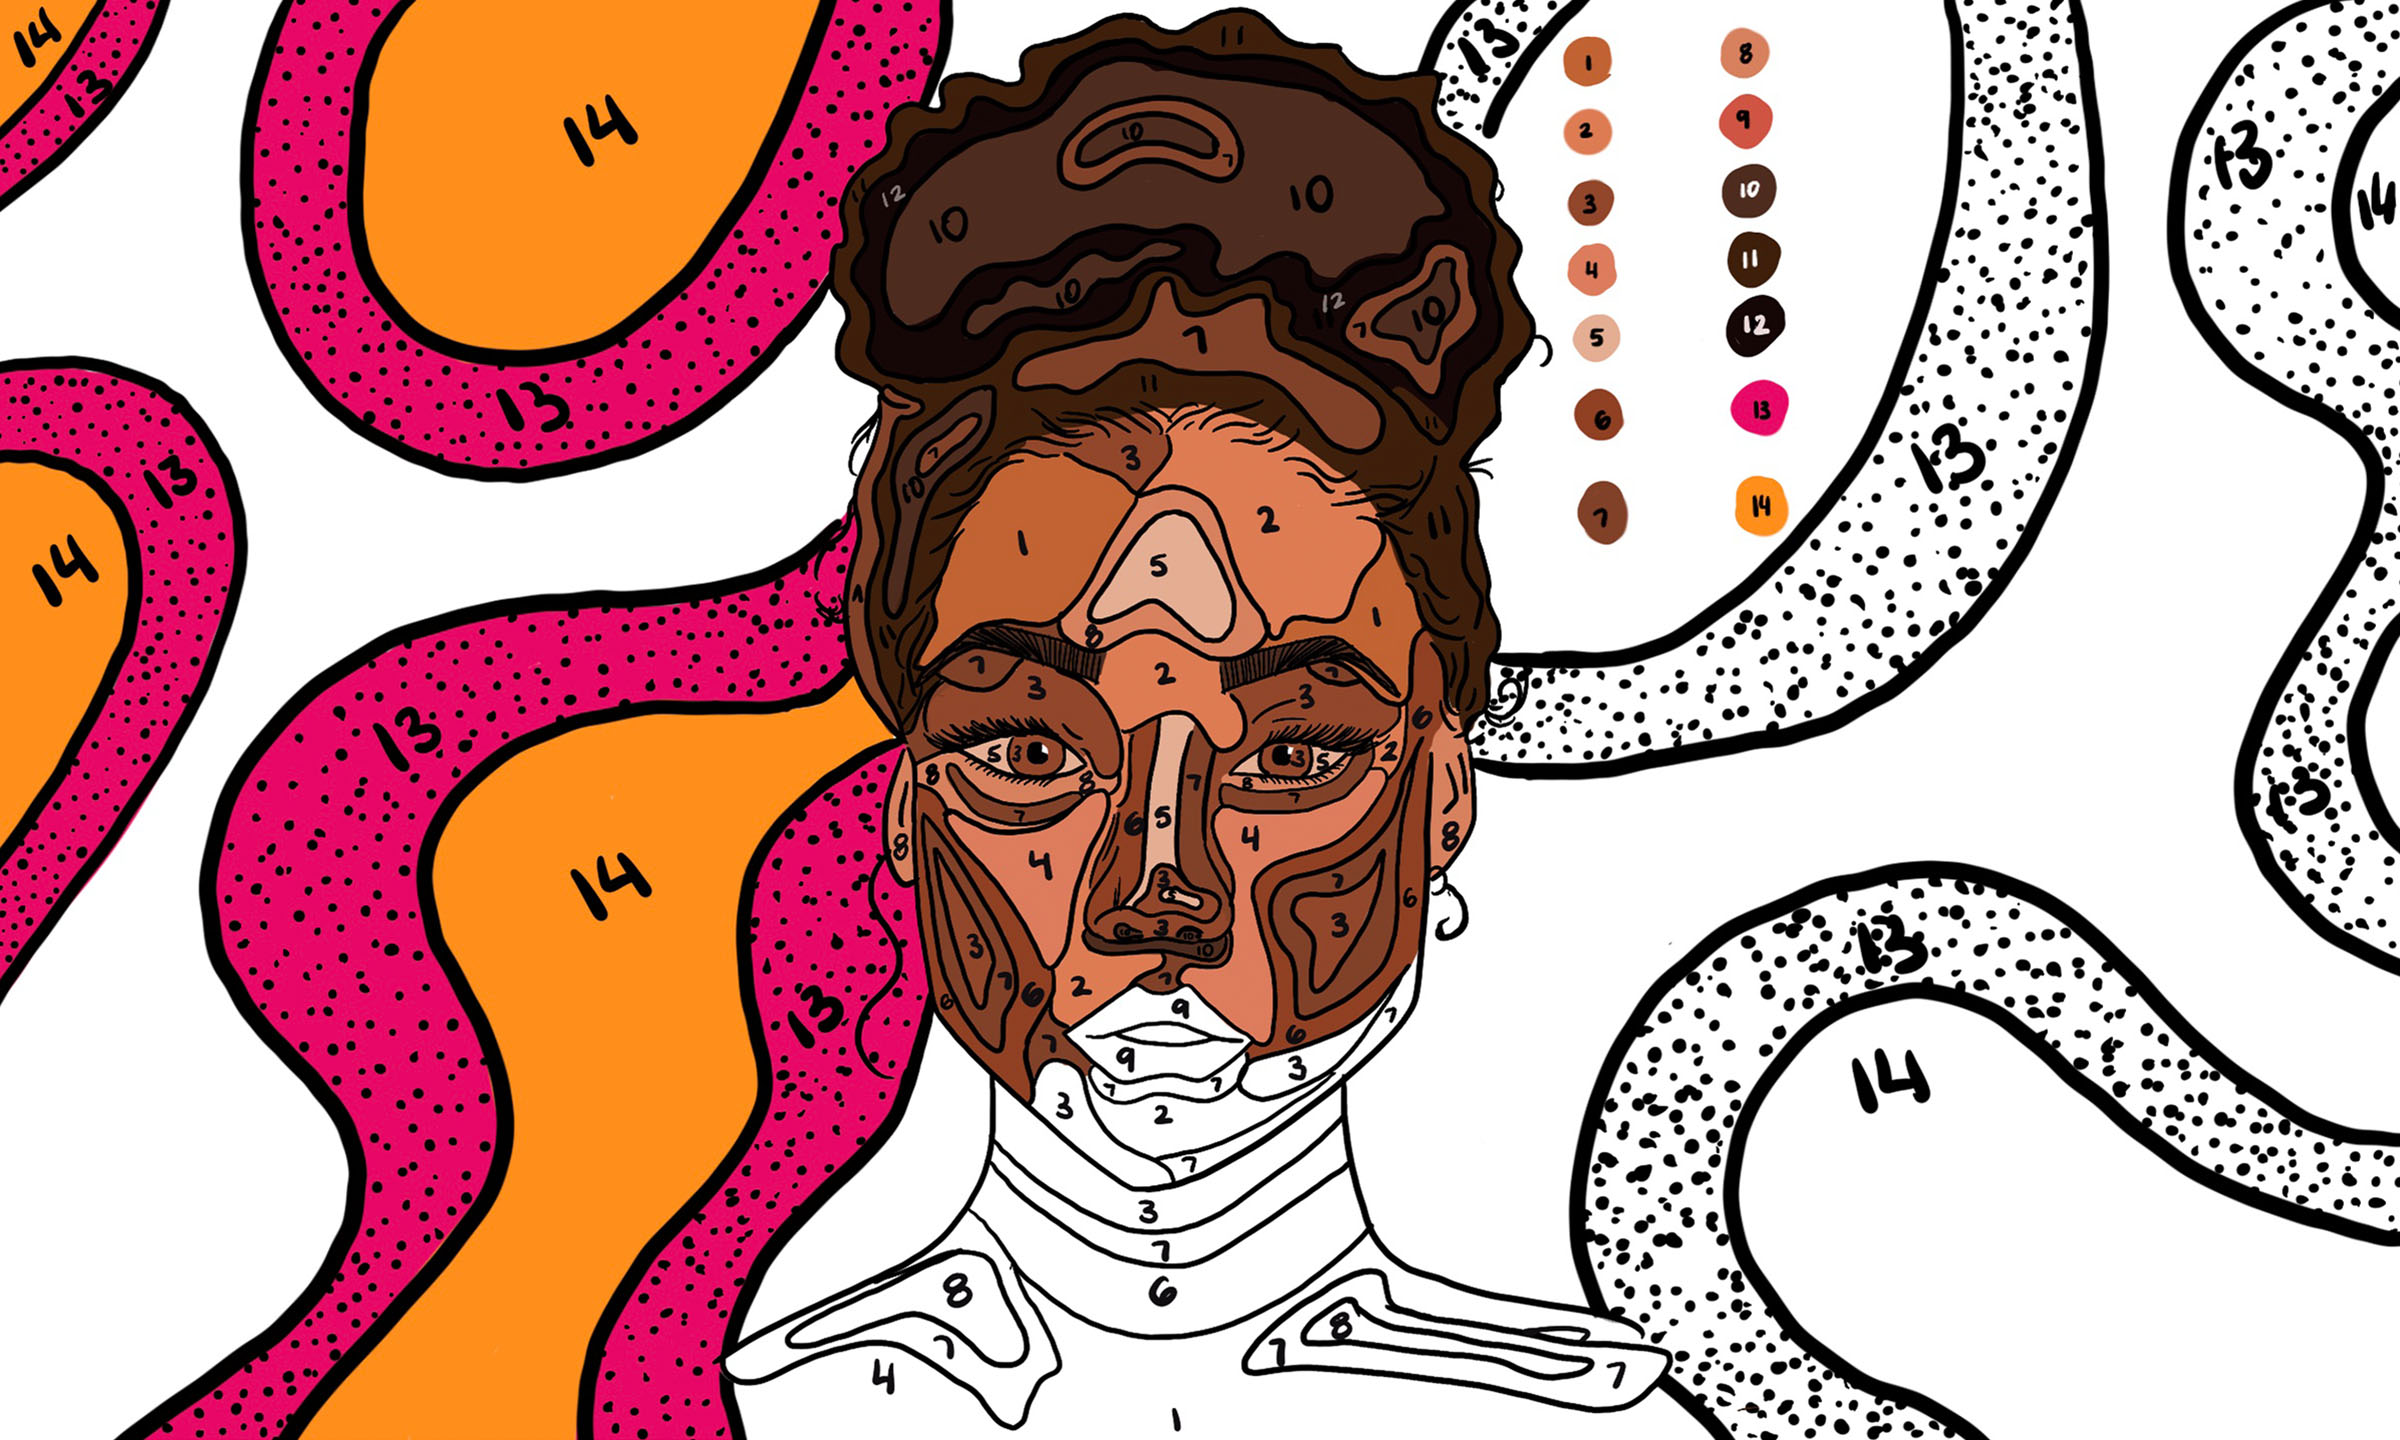 An illustration of a woman depicted in a paint-by-numbers fashion, with half of her face colored in and half not — a metaphor to describe the lack of information some providers have with patients and prescriptions.